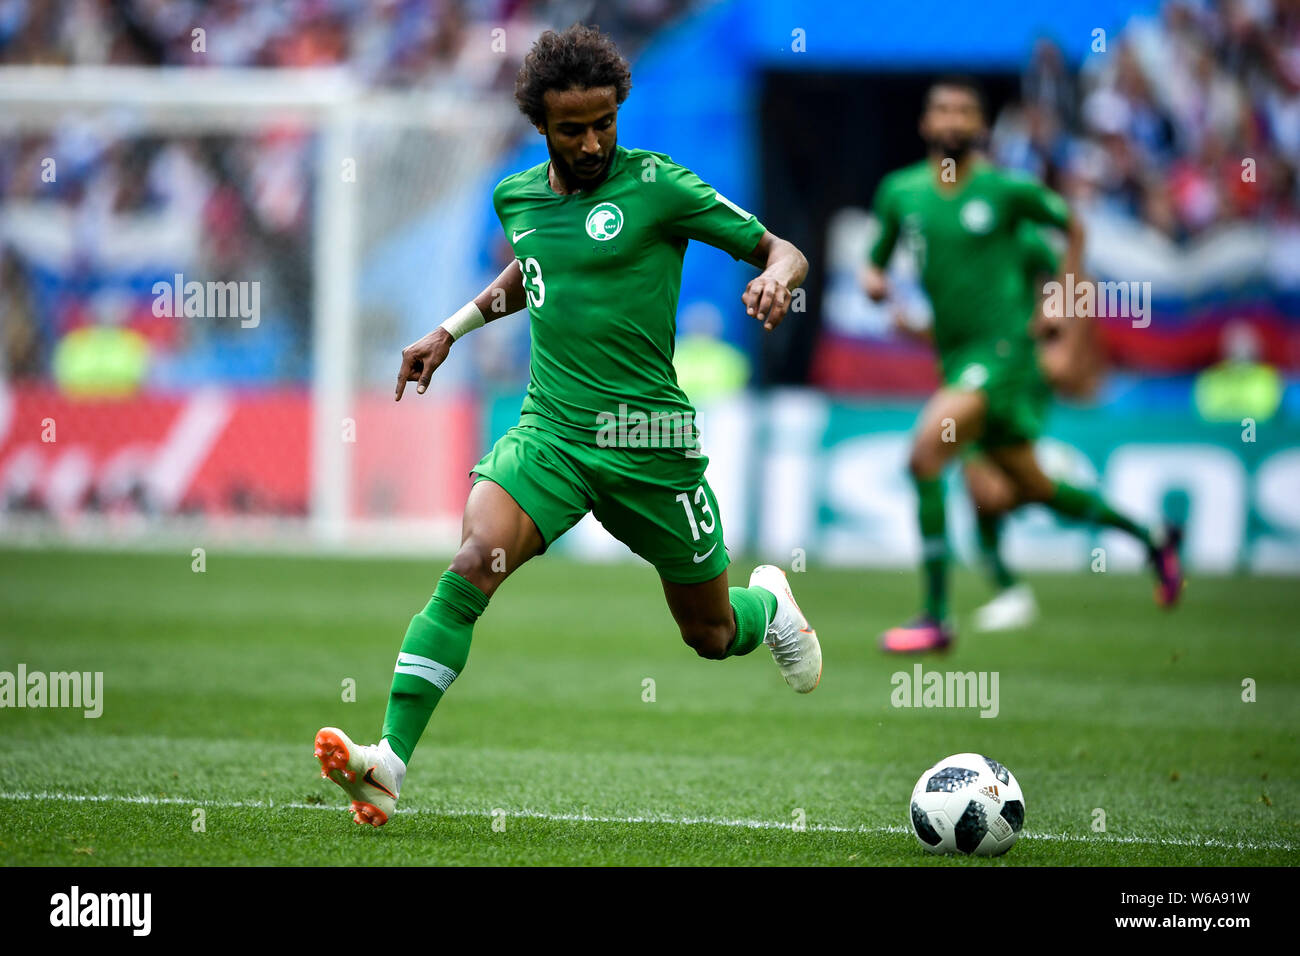 Yasser Al-Shahrani of Saudi Arabia dribbles against Russia in their Group A match during the 2018 FIFA World Cup in Moscow, Russia, 14 June 2018.   Ru Stock Photo